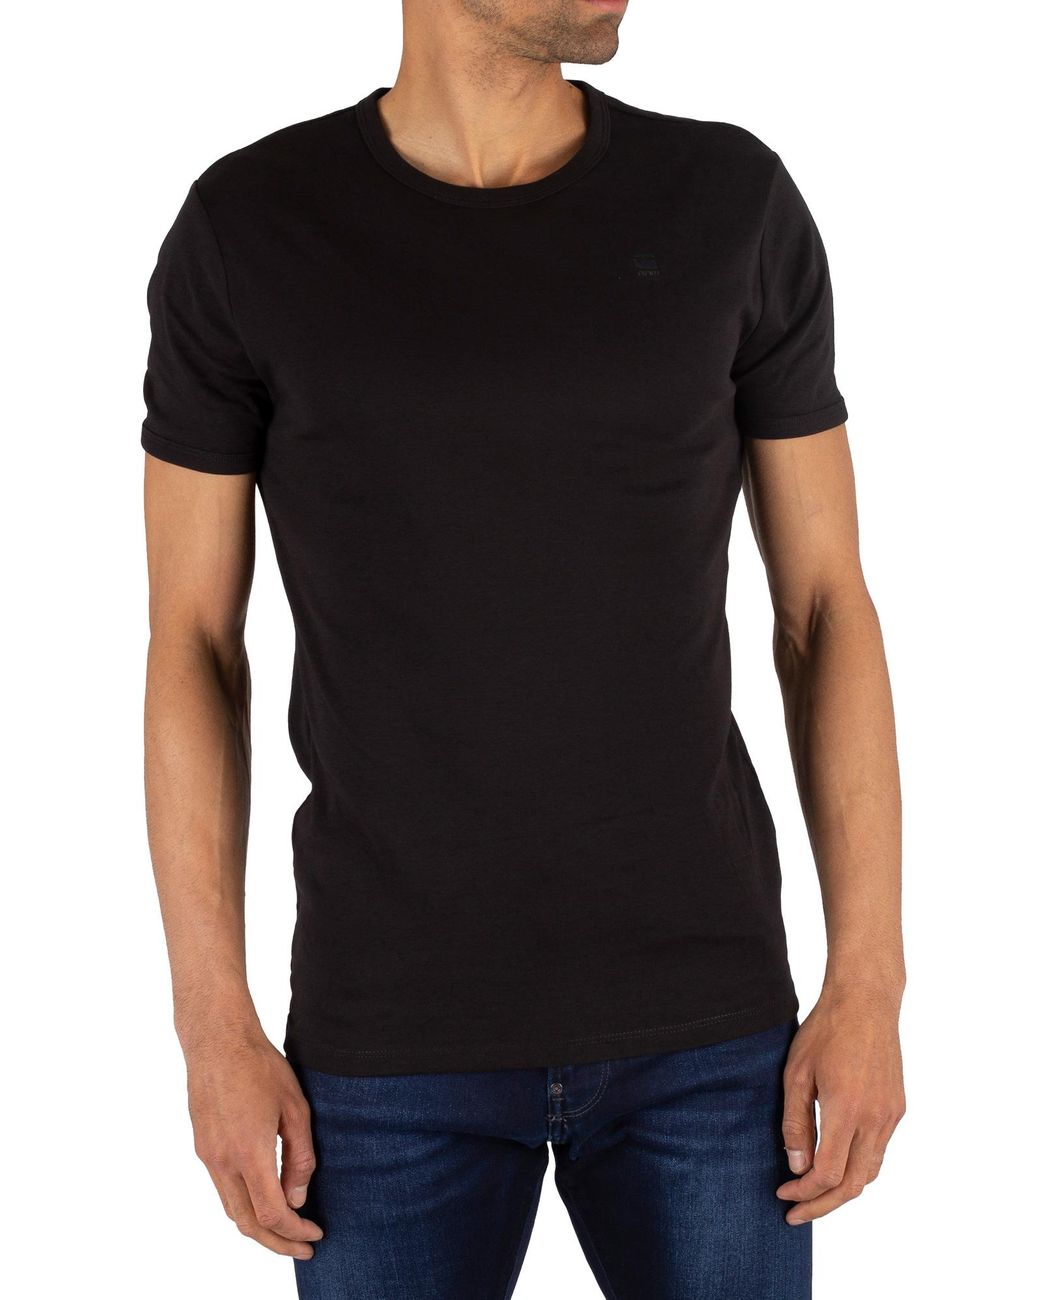 G-Star RAW Cotton 2 Pack Slim Crew T-shirts in Black for Men - Lyst